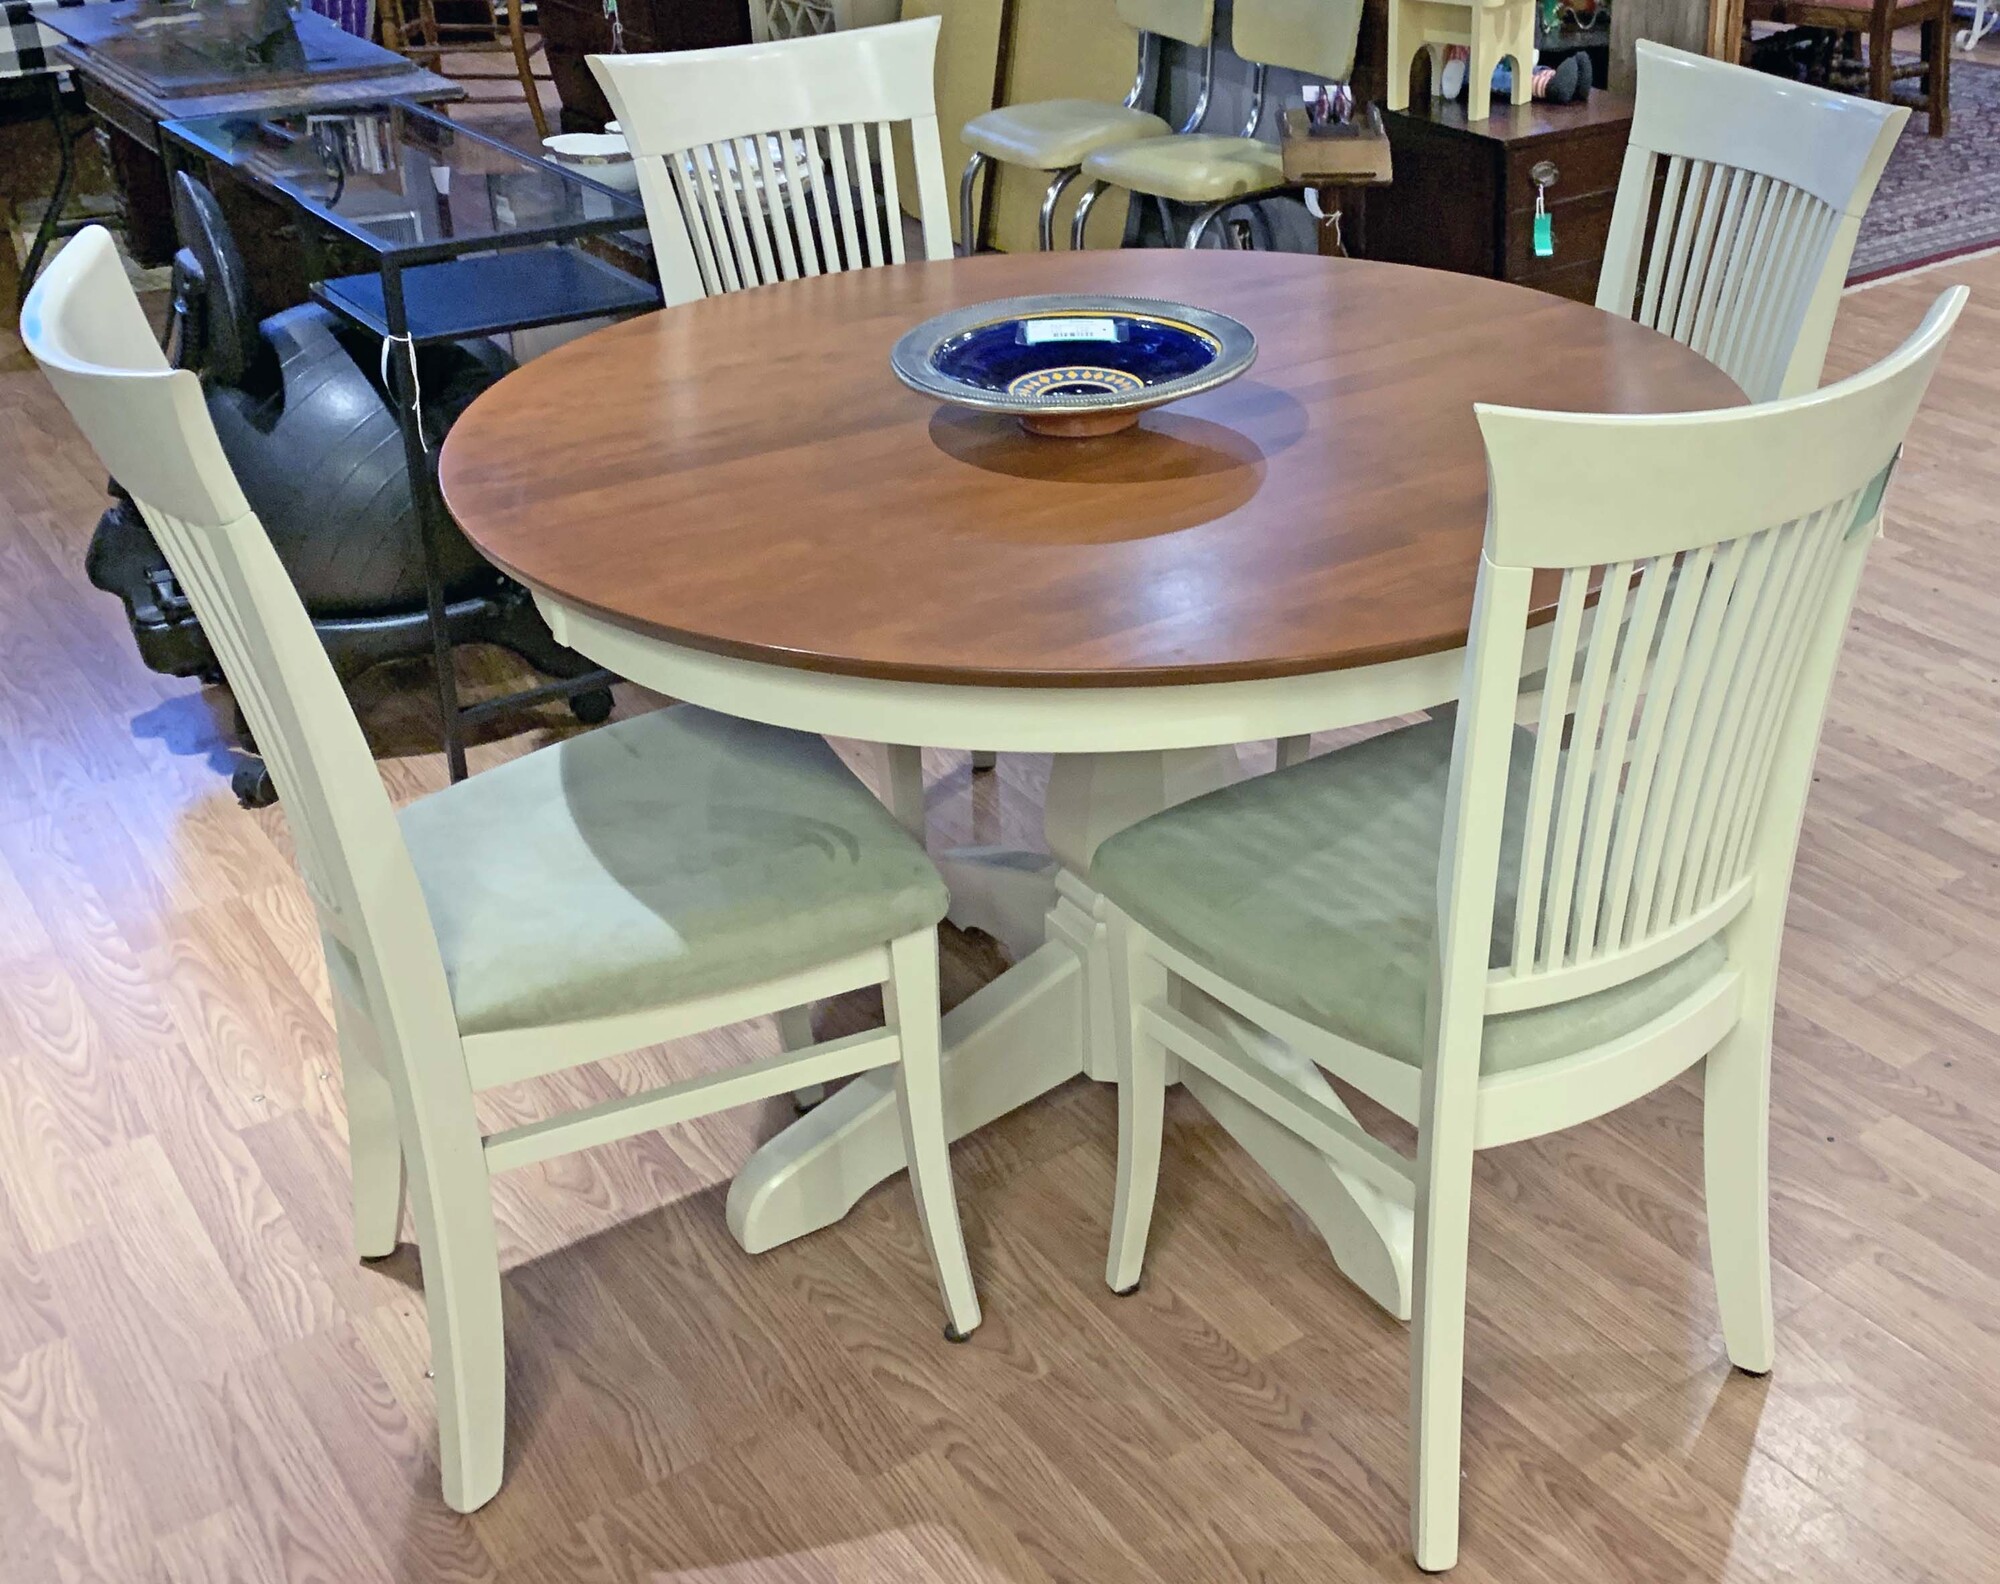 Cream and Brown Dining Table and Four Chairs - $290.
48 Round x 30 Tall with a 20 In Leaf.